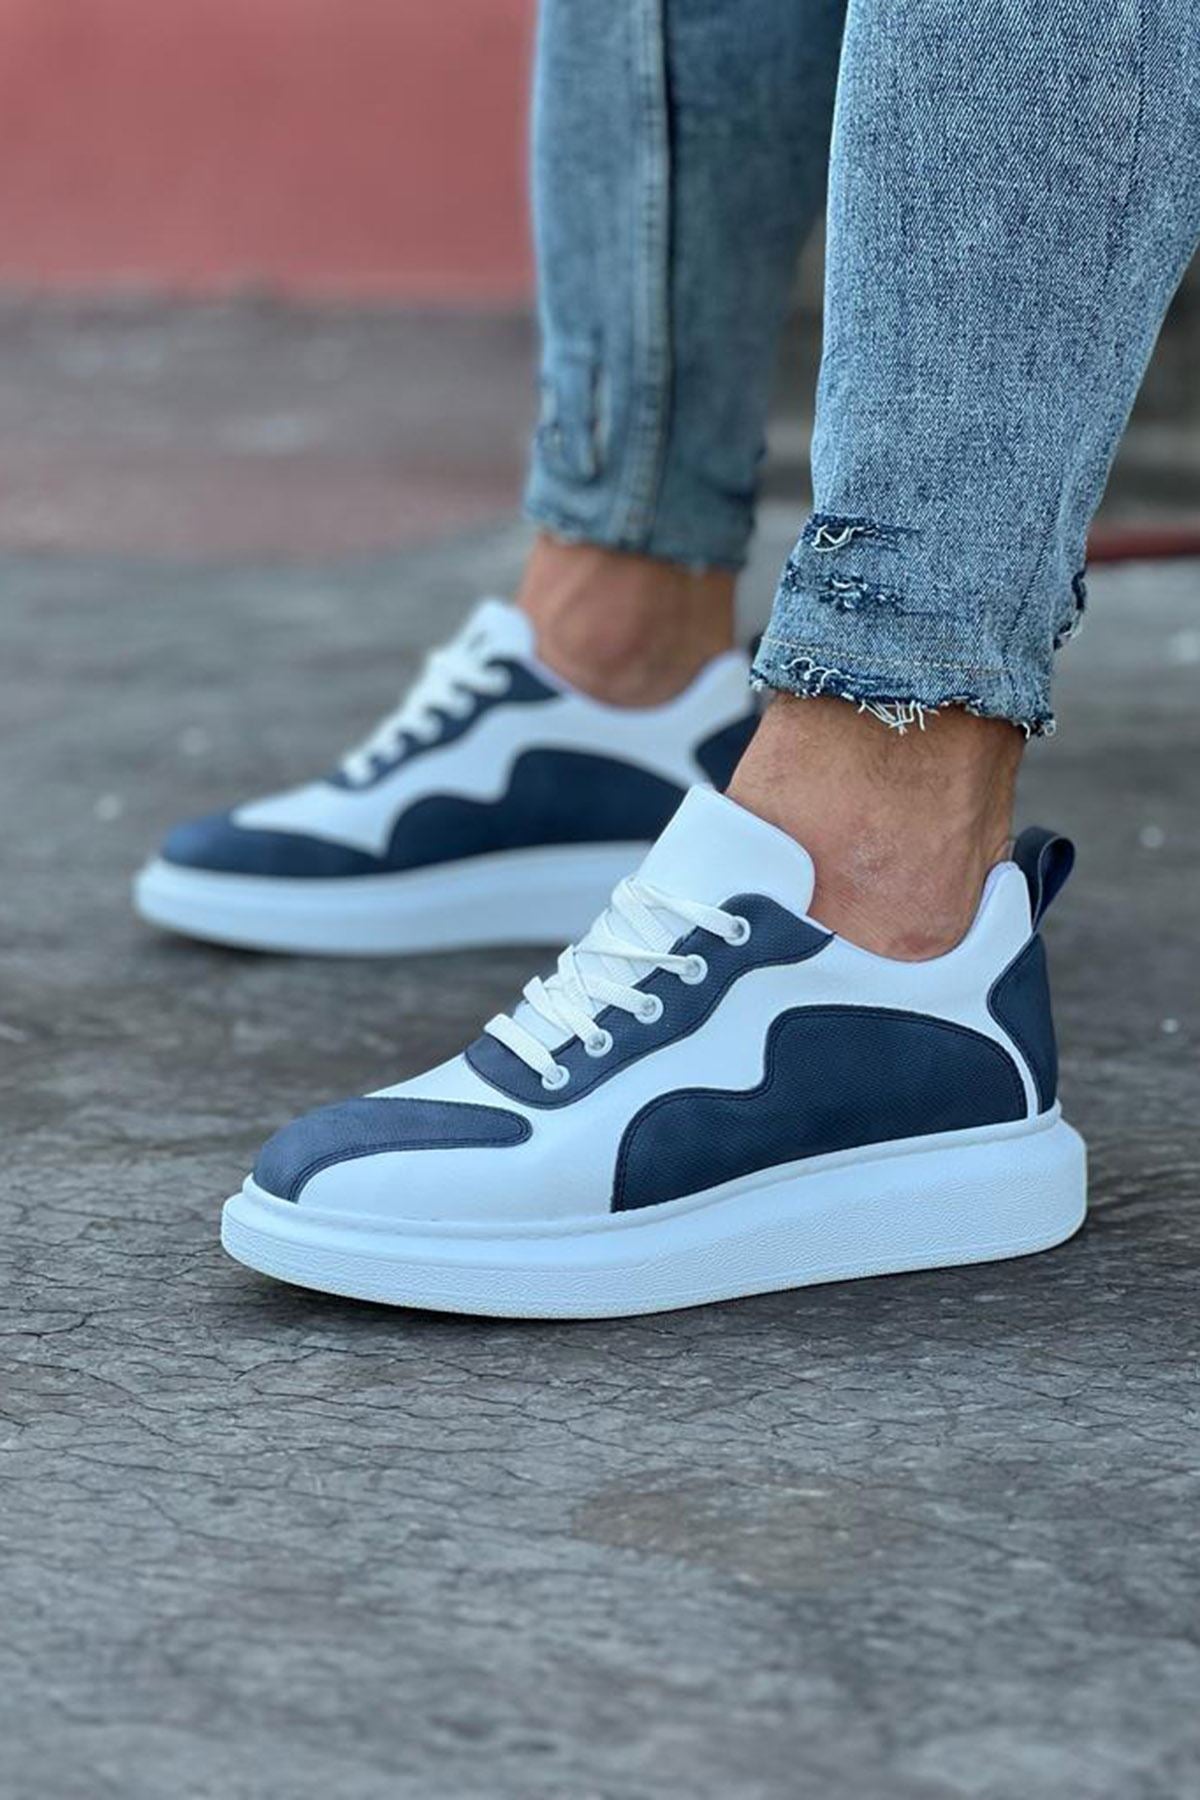 WG301 White Blue Men's Casual Shoes